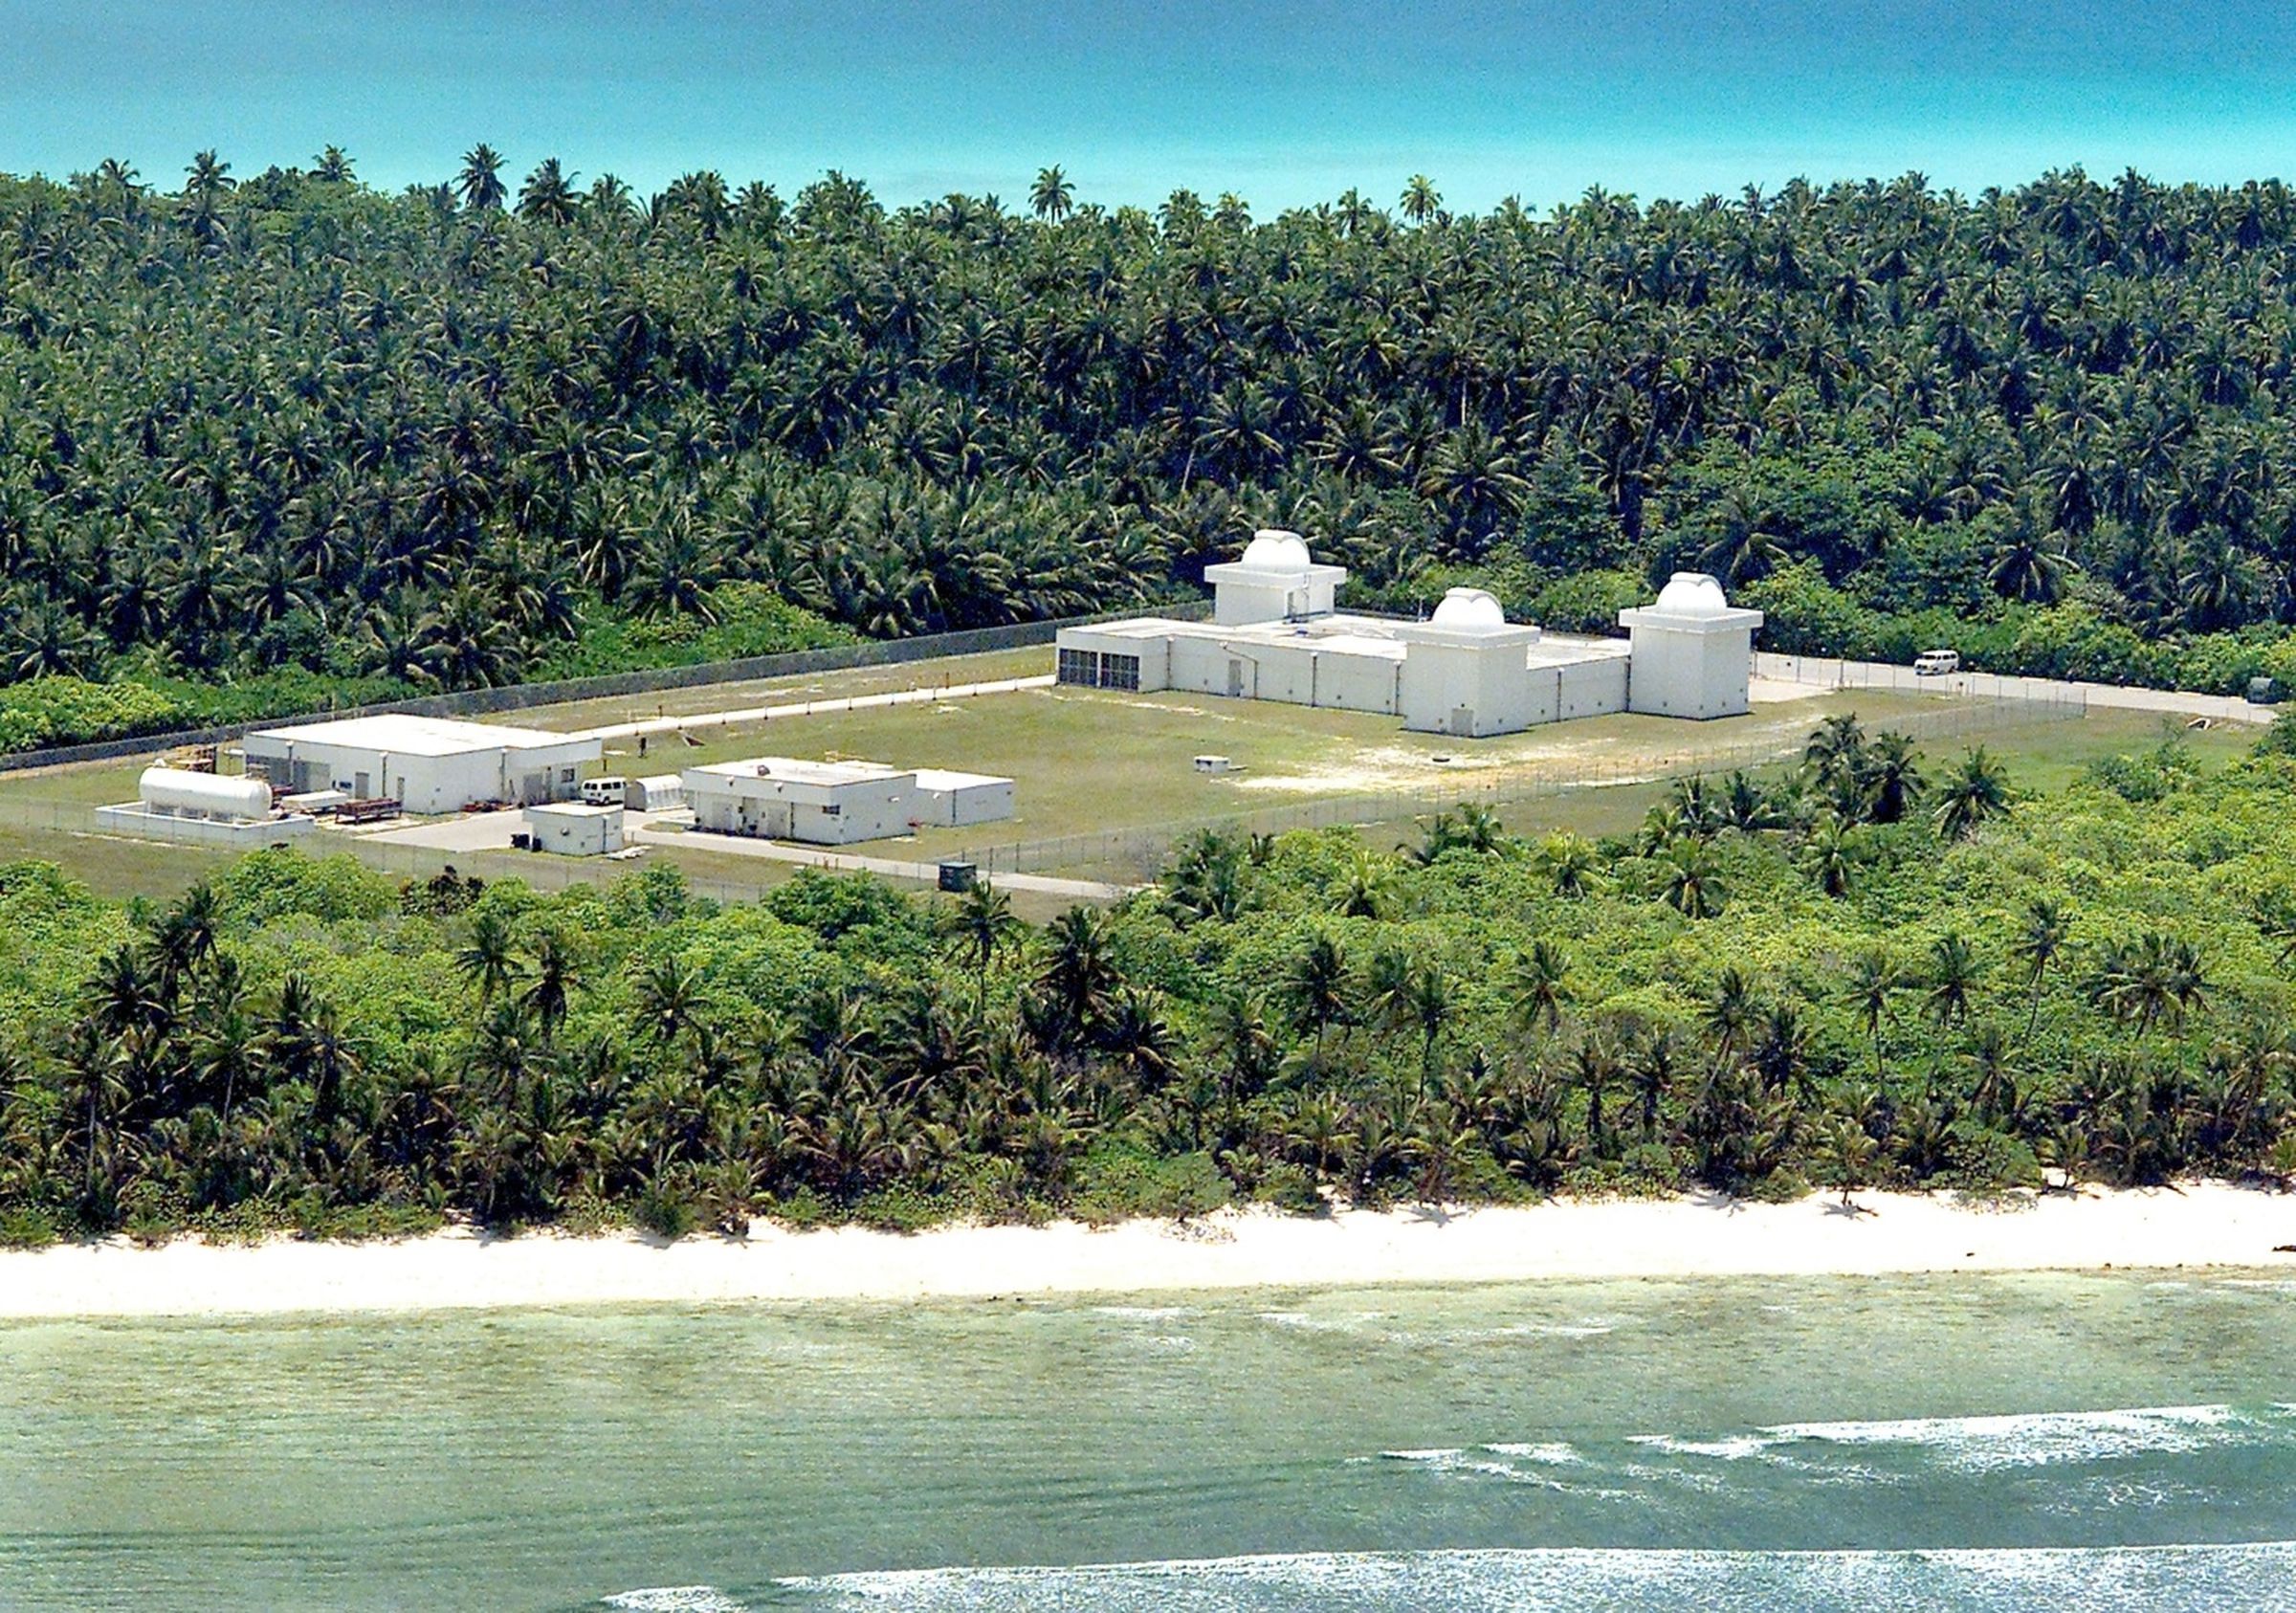 One of the Air Force’s tracking stations on Diego Garcia, which helps to catalog space objects